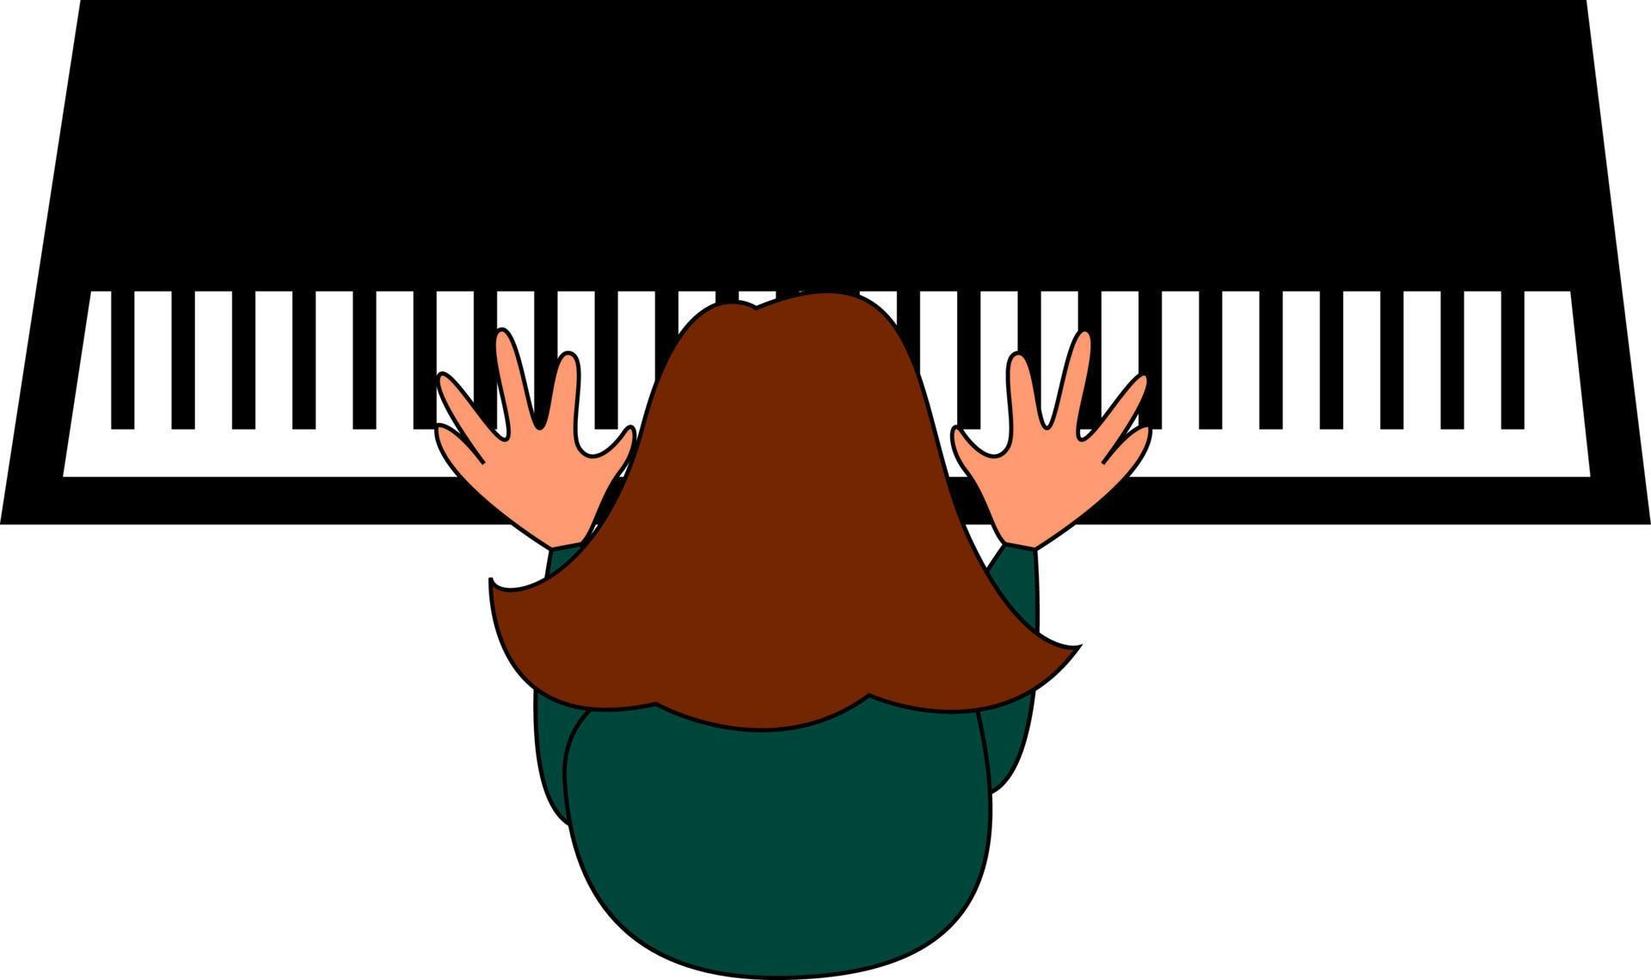 Woman playing piano, illustration, vector on white background.